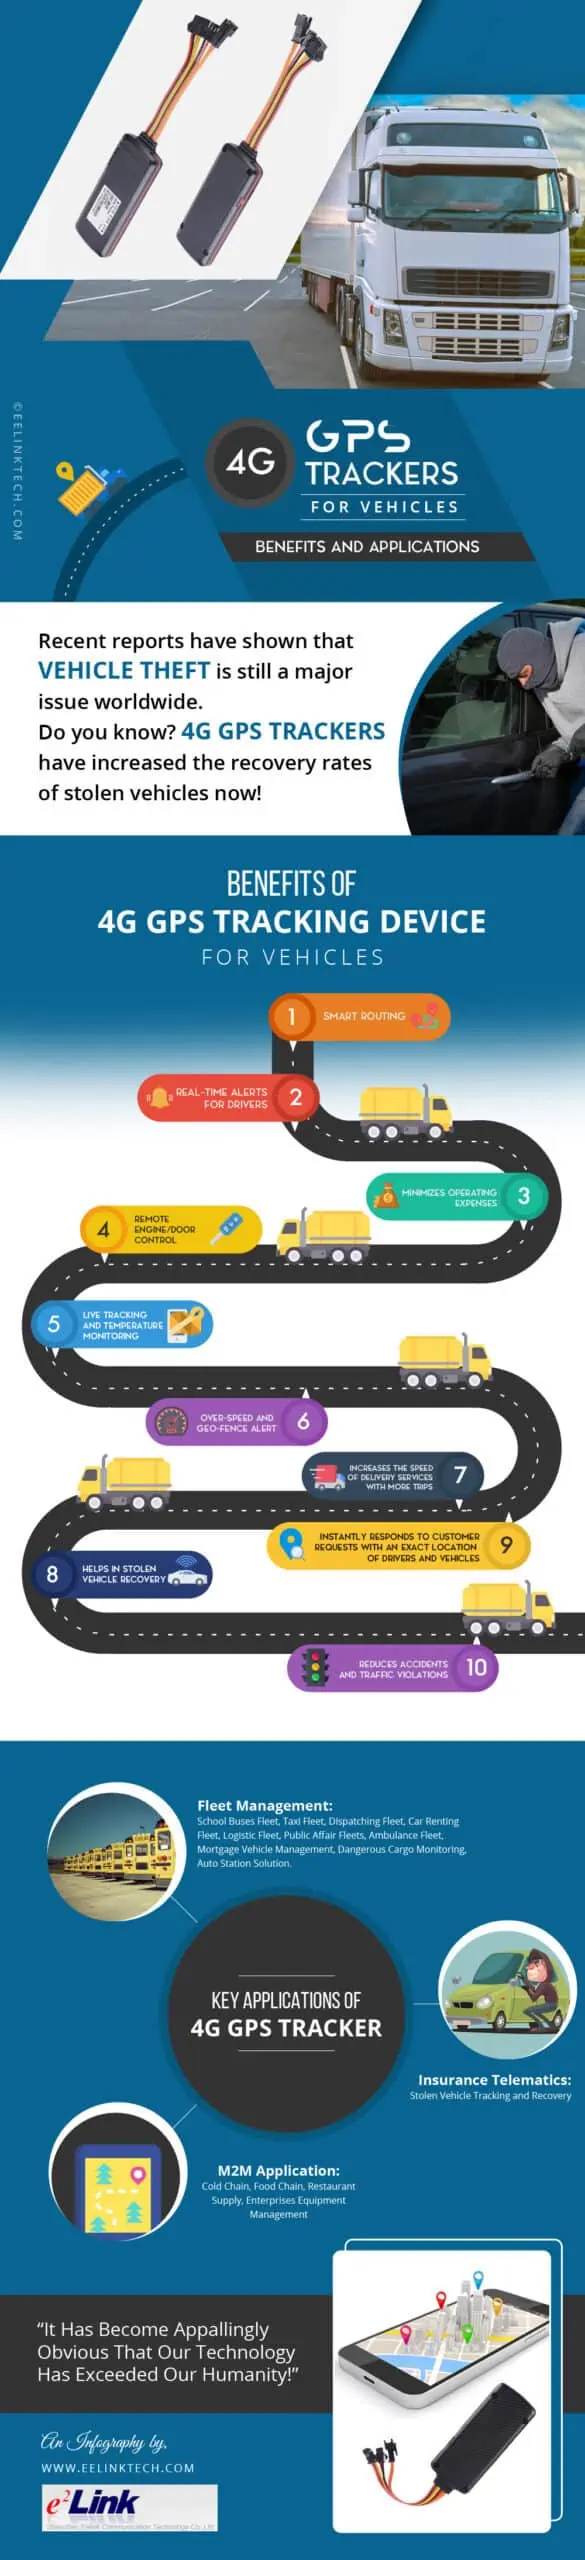 An Infographic on Applications of 4g GPS trackers